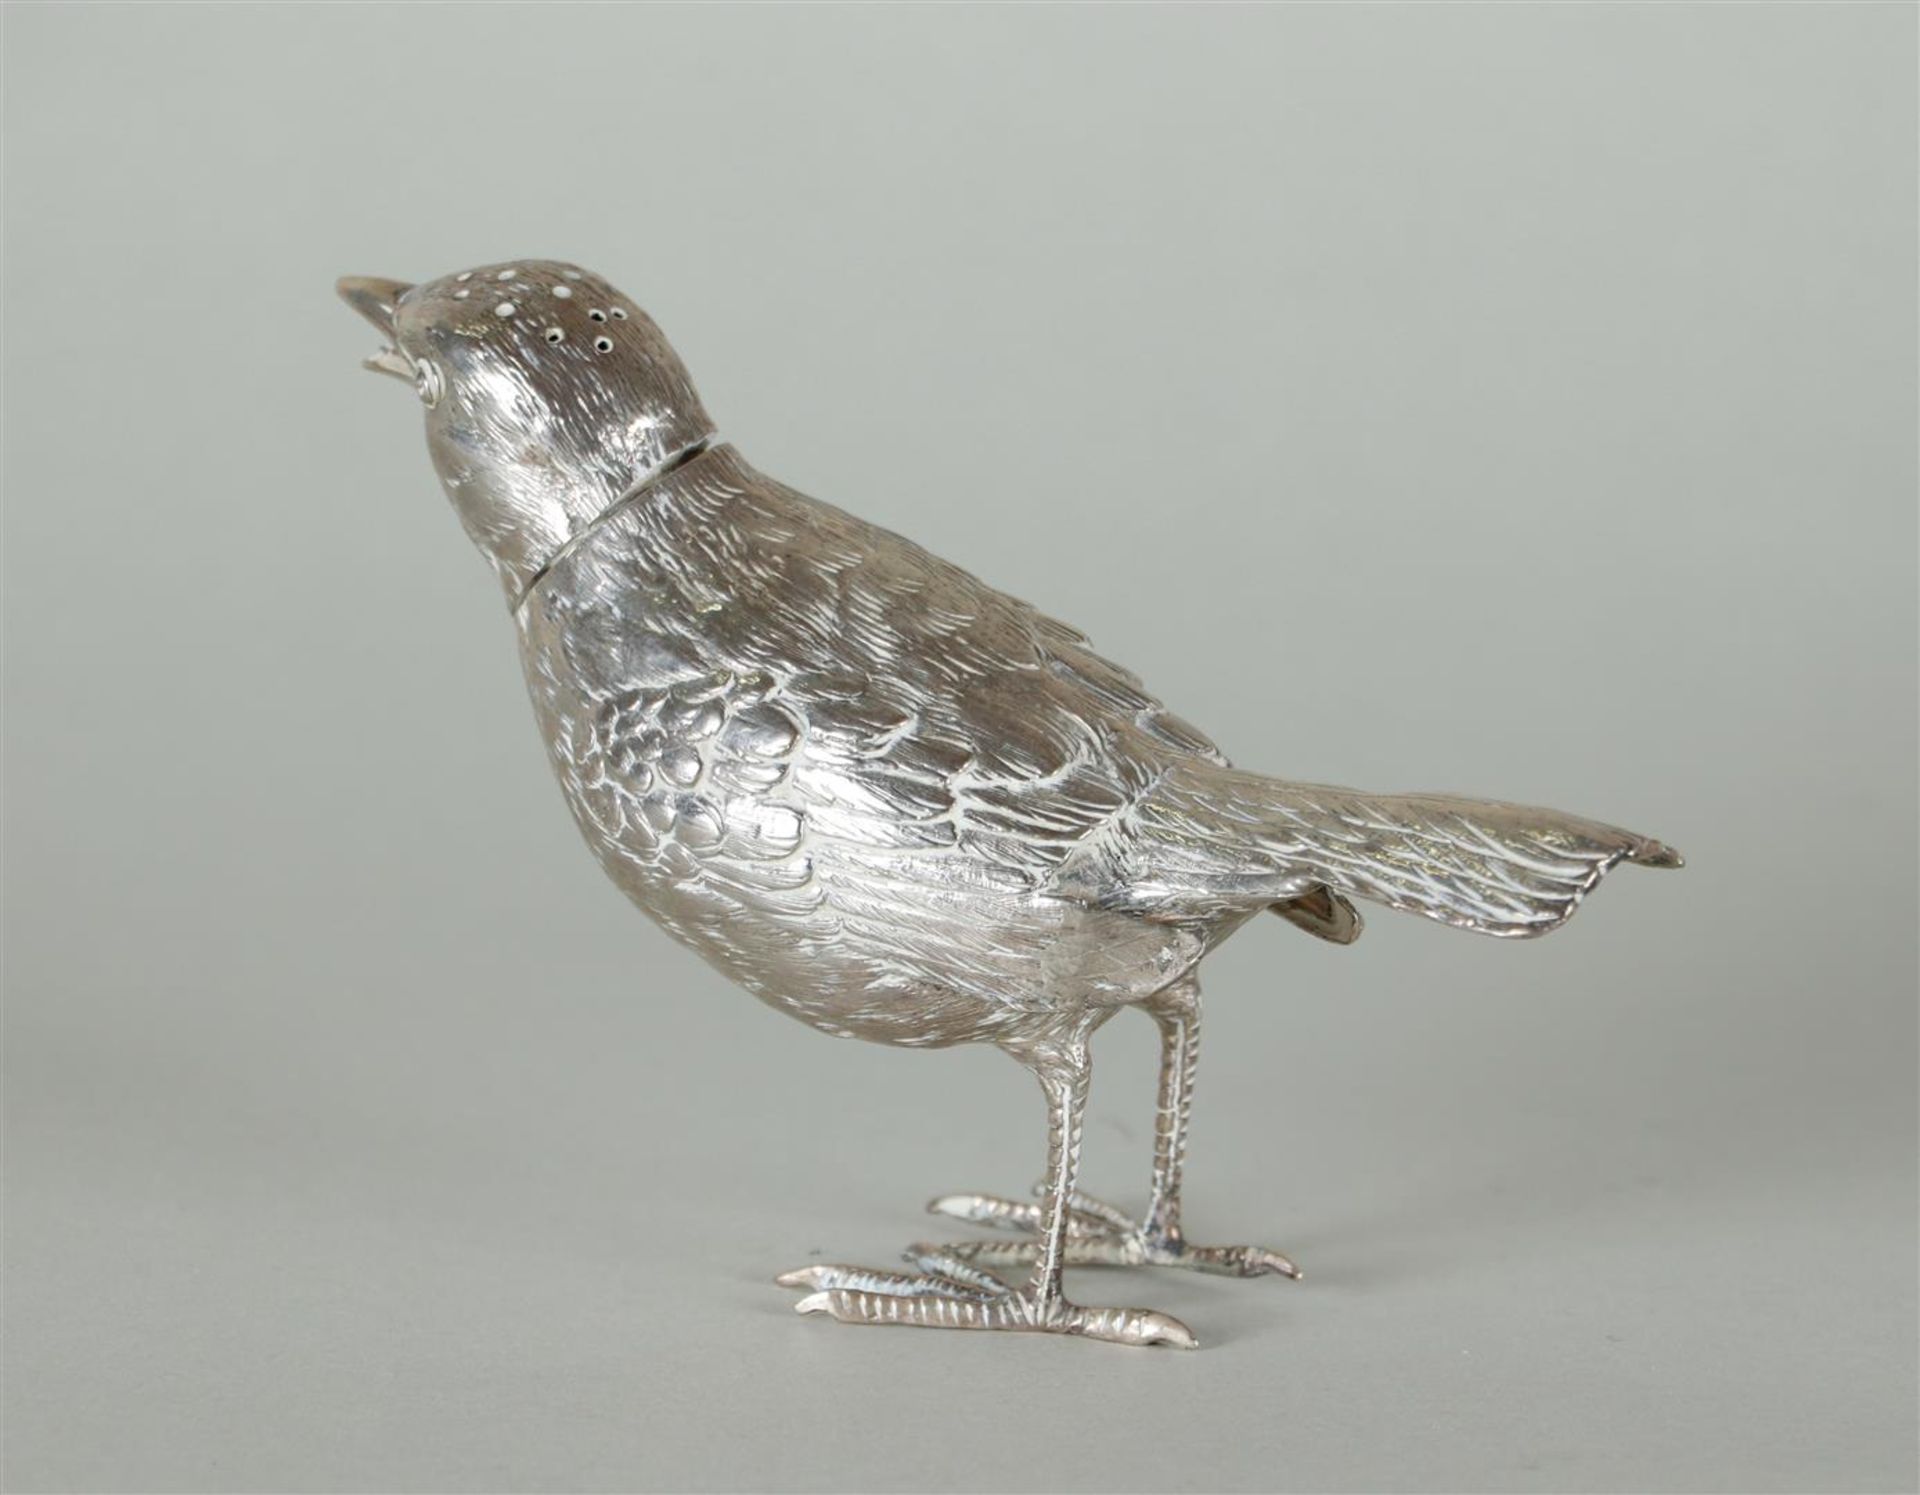 Silver table piece / spreader in the shape of a thrush - Image 4 of 7